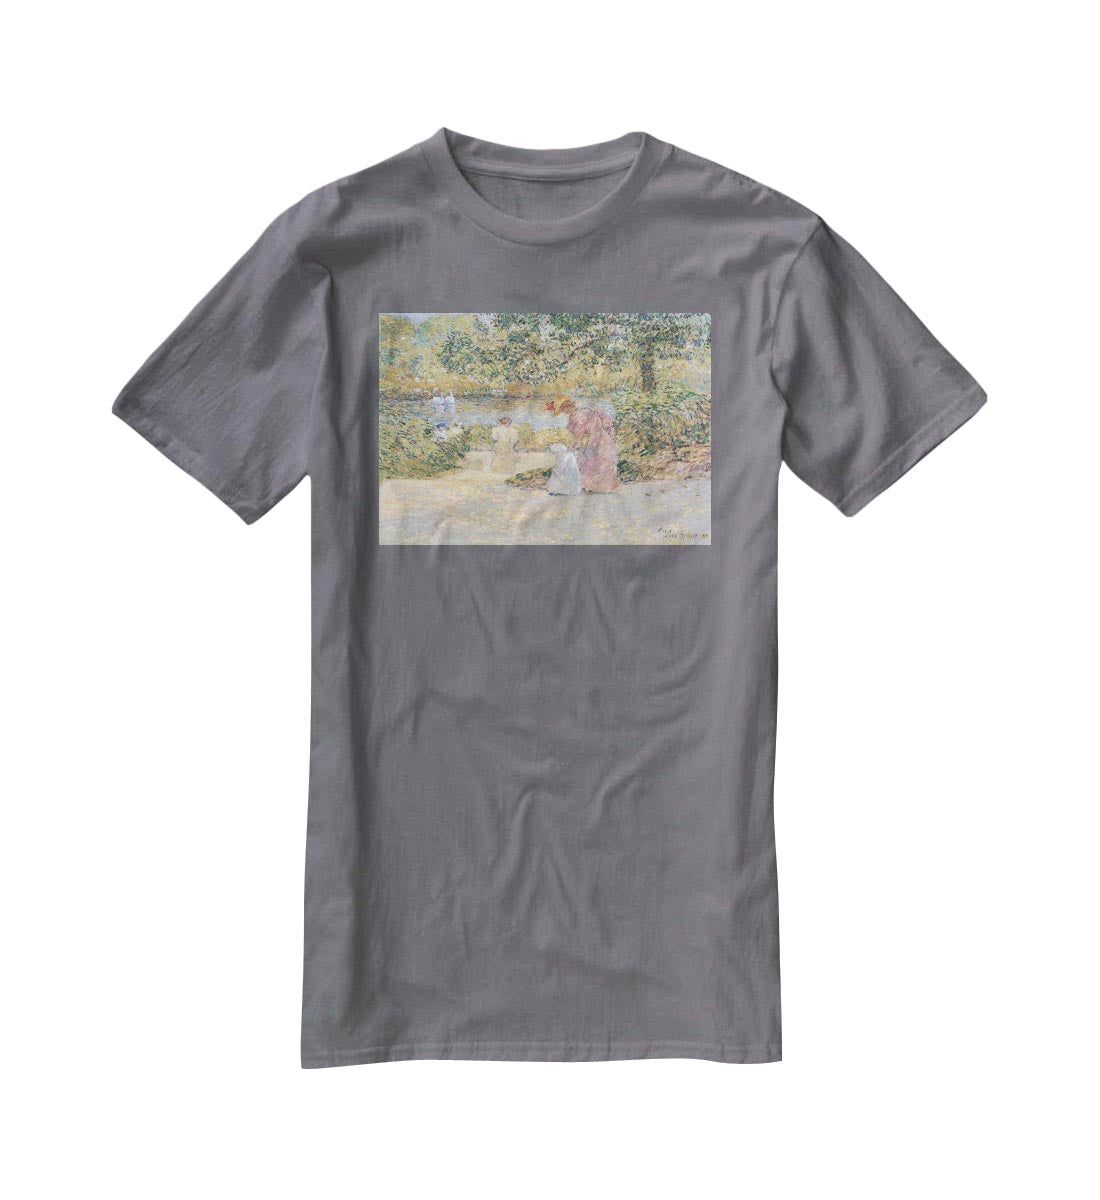 The staircase at Central Park by Hassam T-Shirt - Canvas Art Rocks - 3